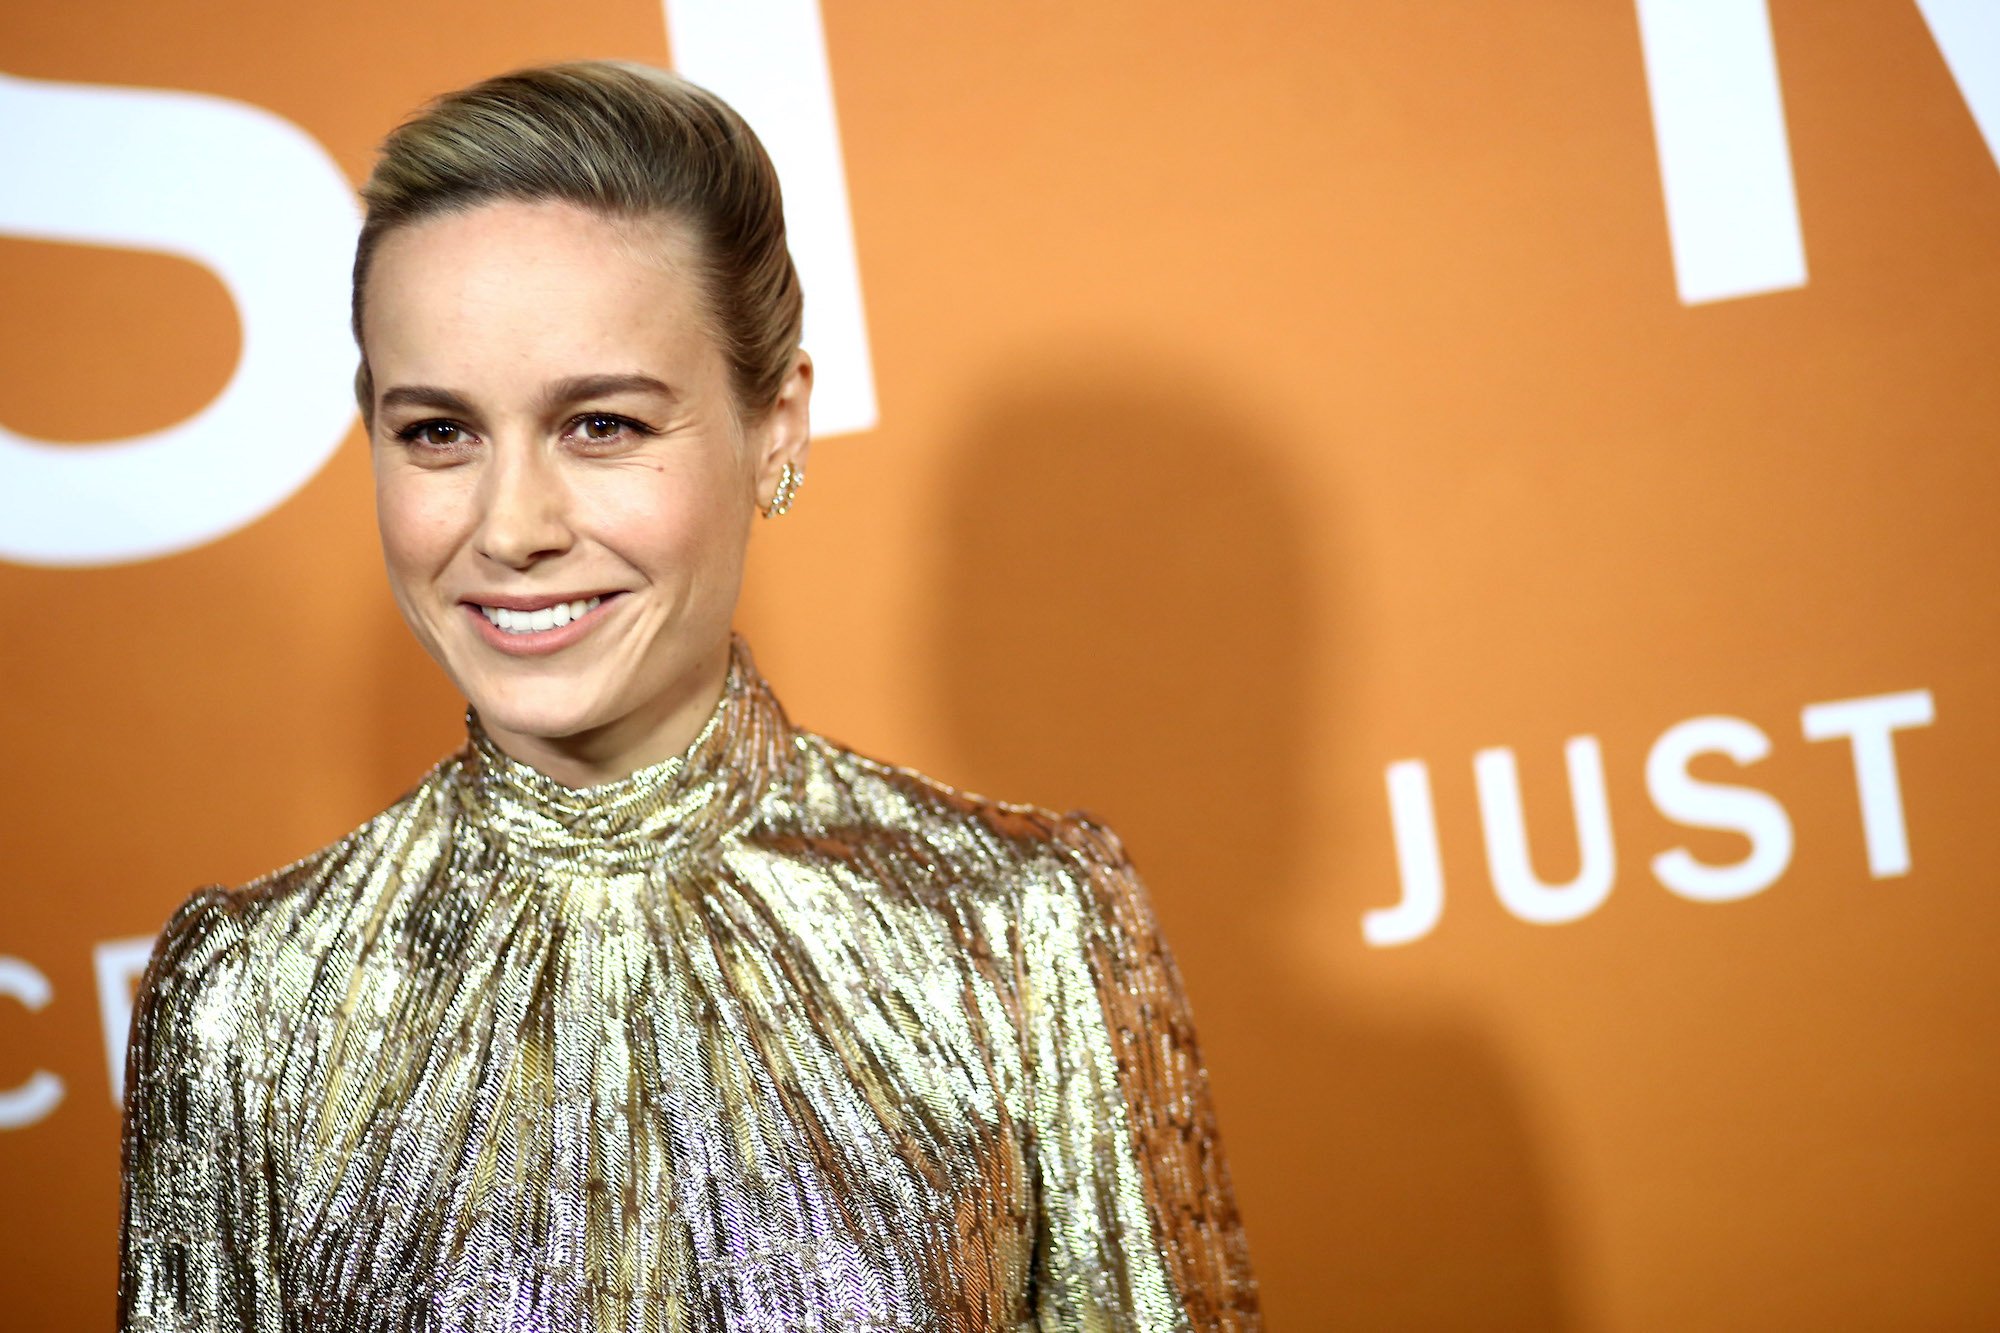 ‘Captain Marvel’: Brie Larson’s Performance Wasn’t ‘Dry’ – It Perfectly Mirrored the Comics